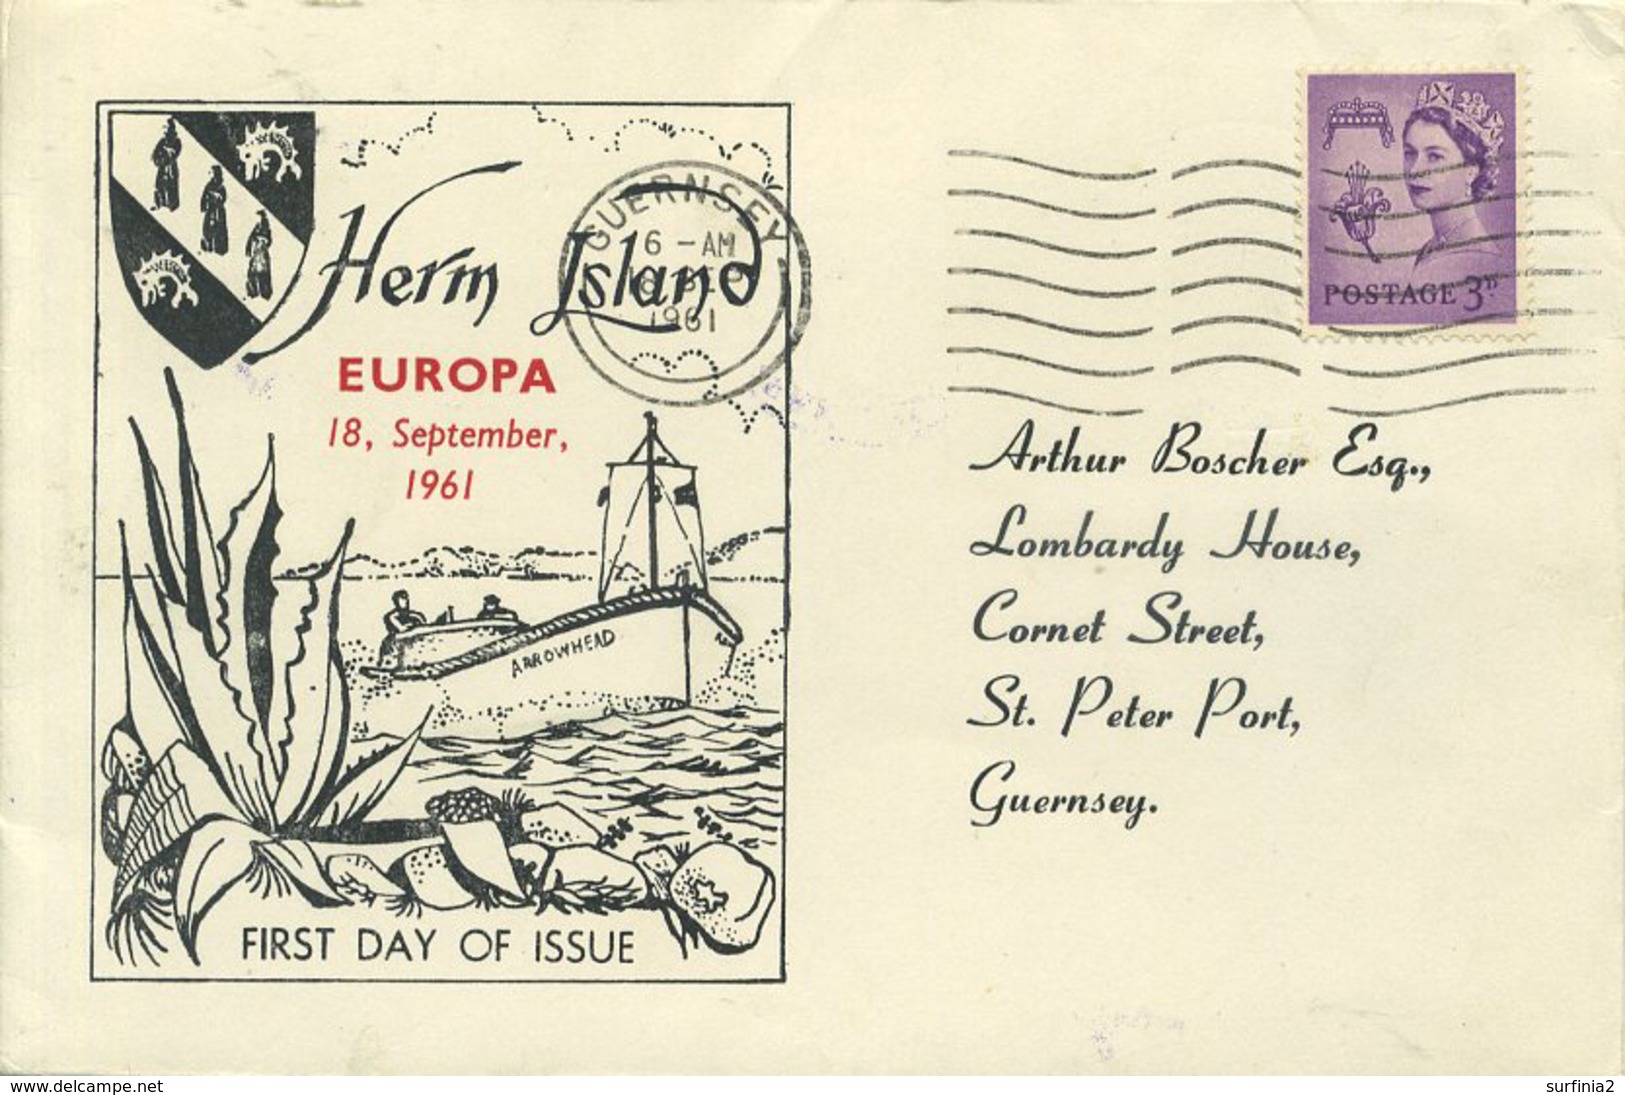 STAMPS - 1961 HERM ISLAND COVER TO GUERNSEY WITH HERM EUROPA SET - Cinderellas